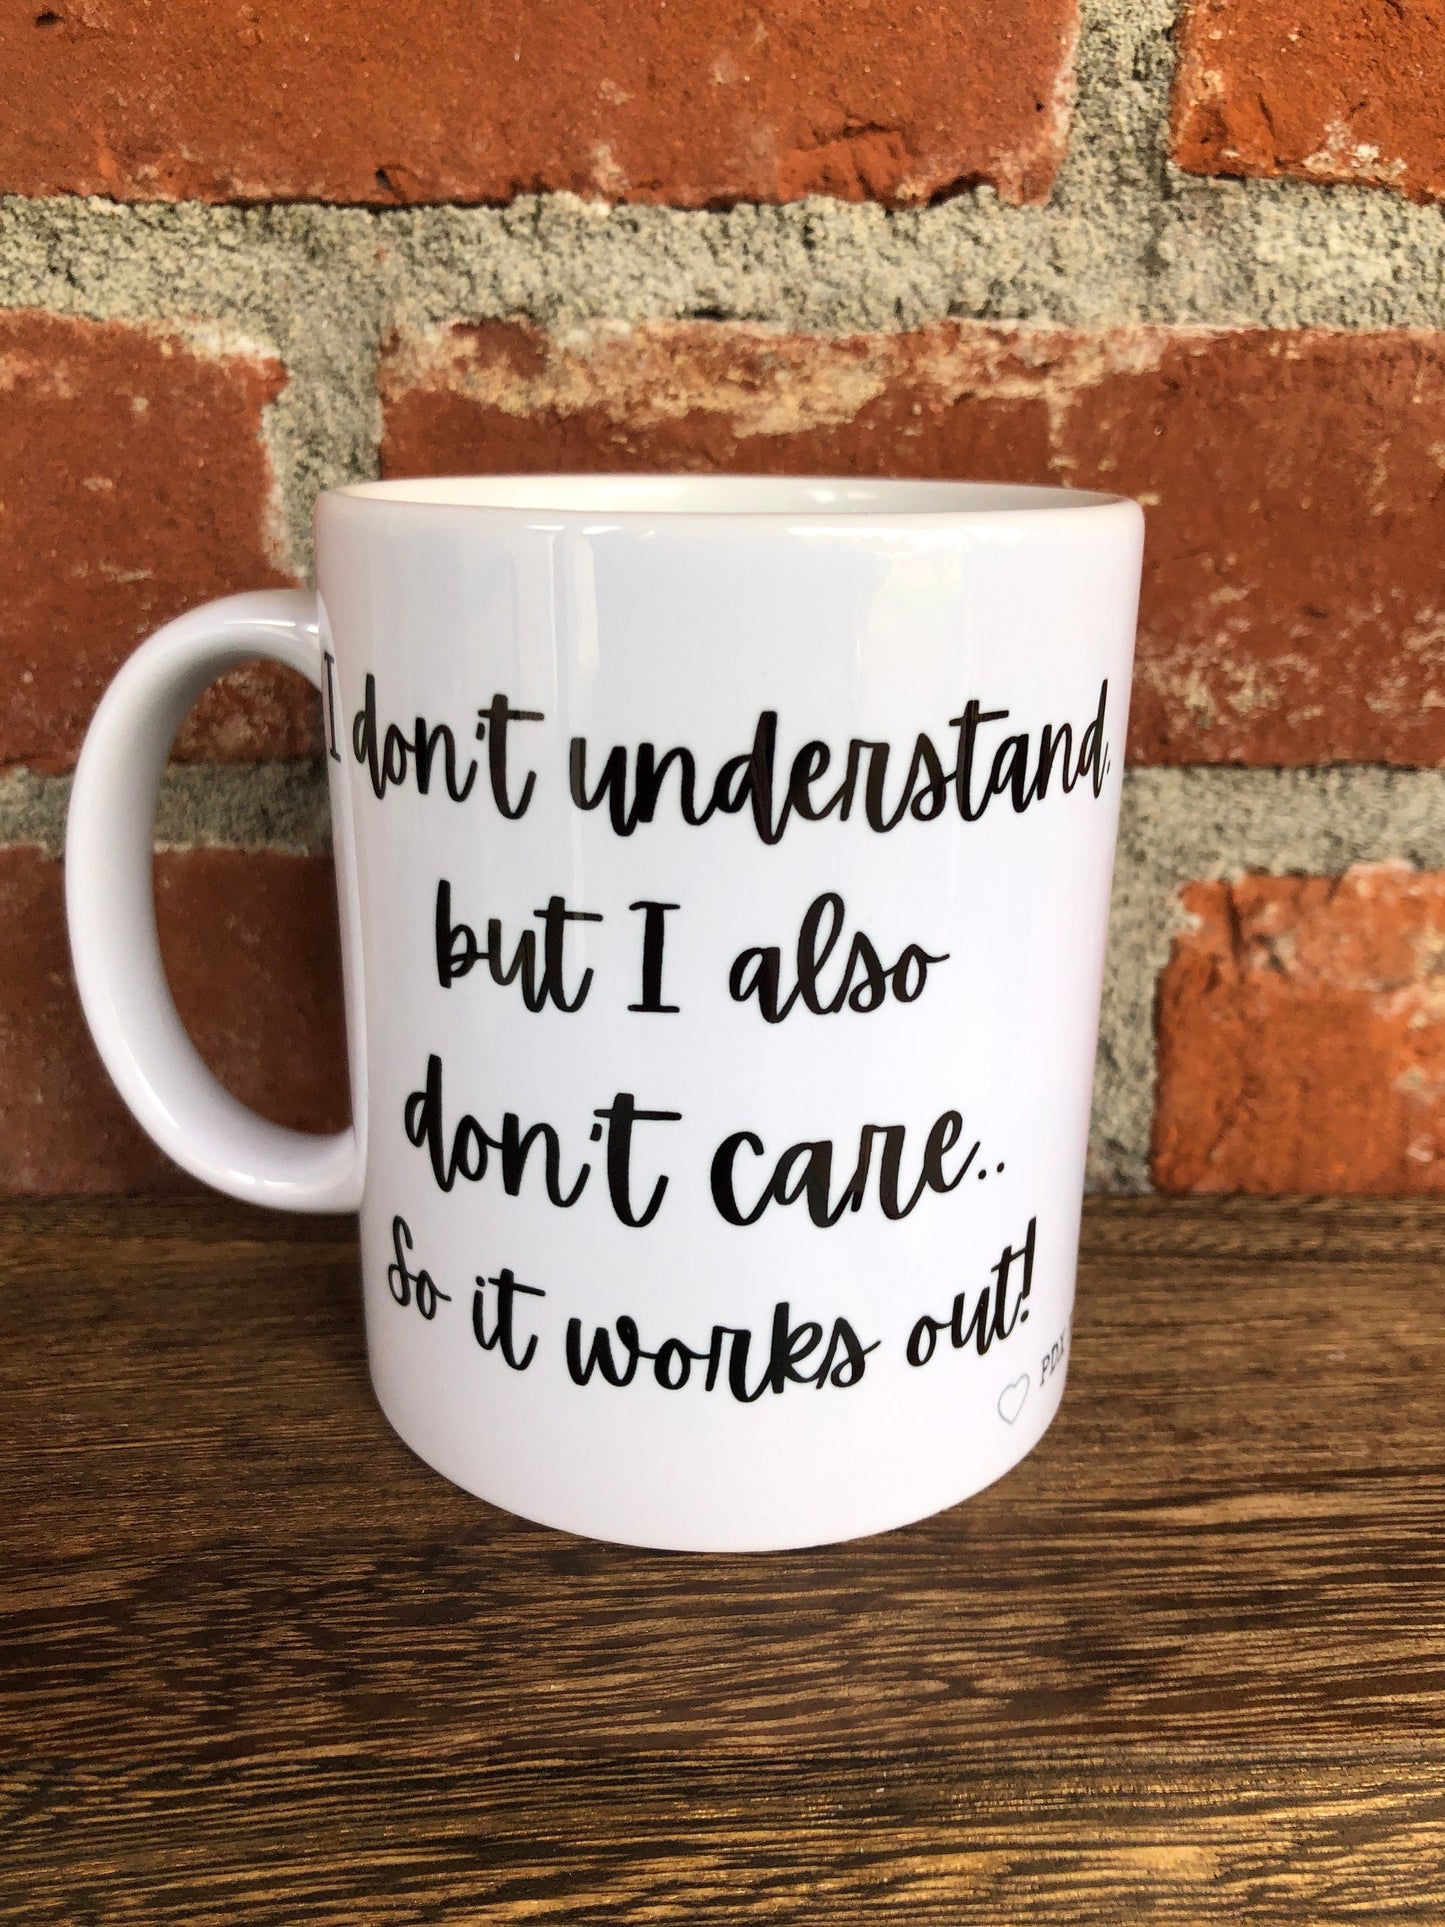 Fun Coffee Mug, Funny Coffee Cup, Adult Humor mug, PDX Flower Power  "I don't understand, But I also don't care...so it works out." Mug